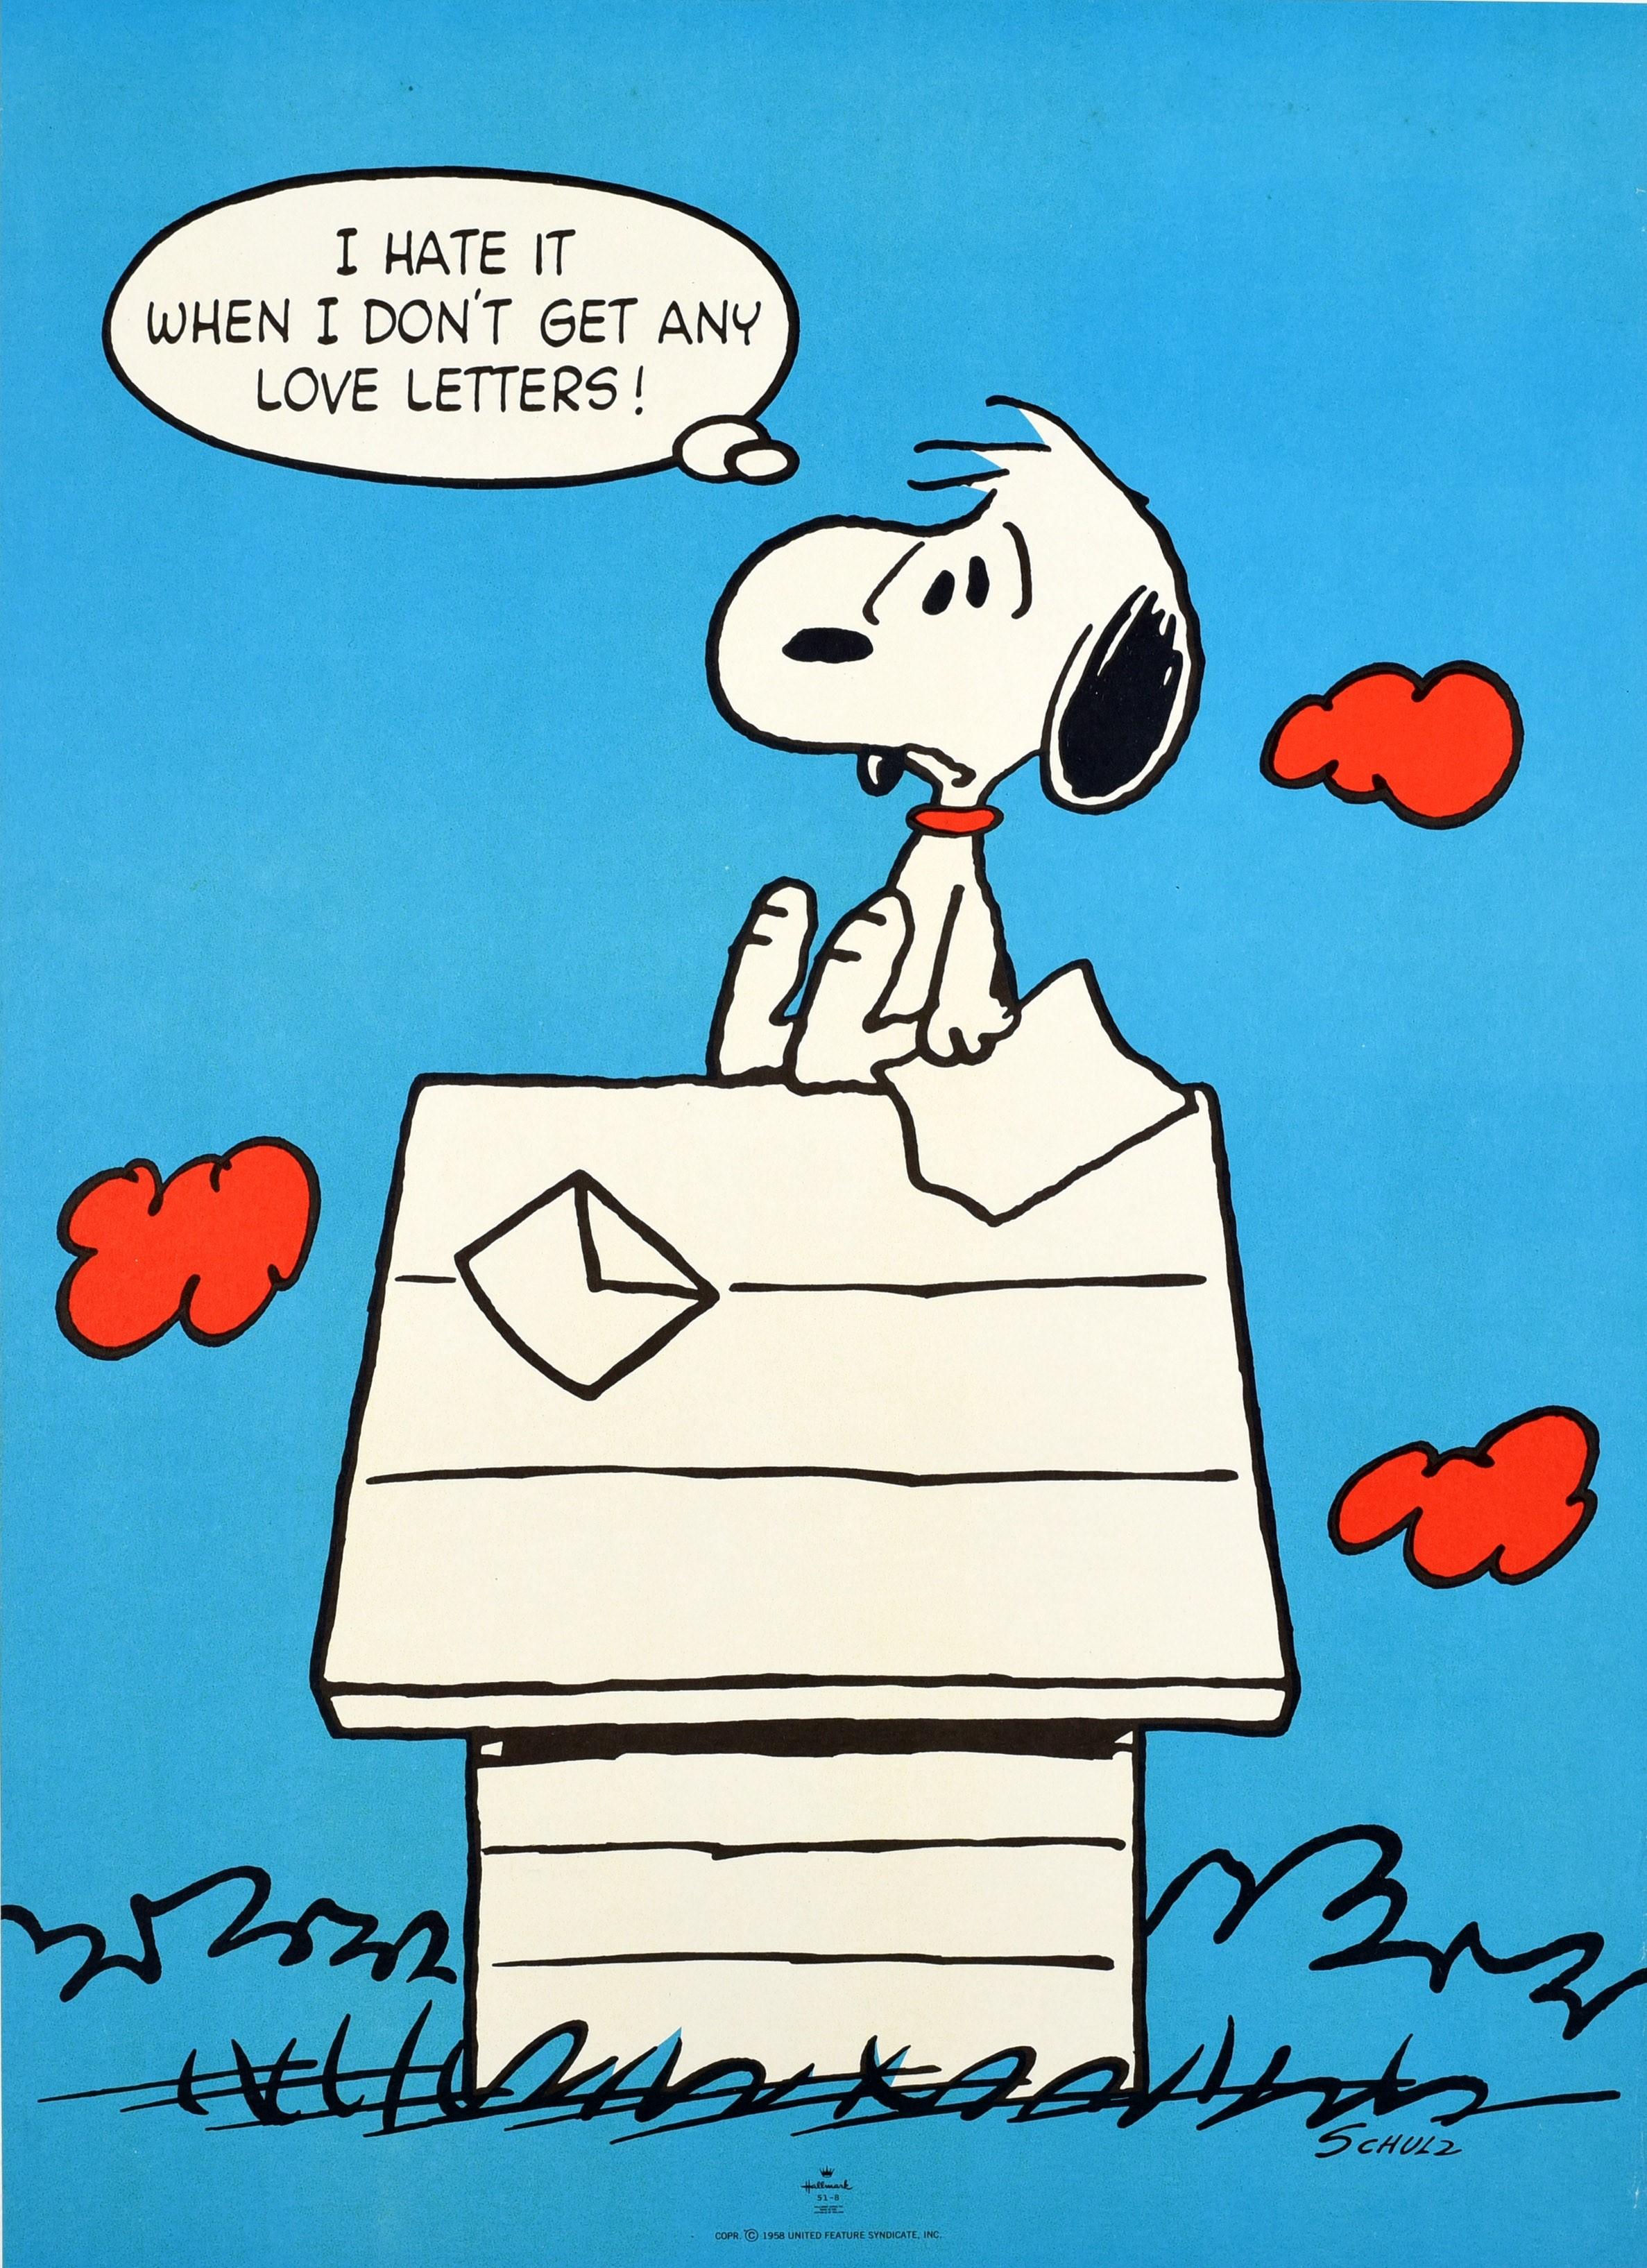 Original vintage poster featuring the iconic comic character Snoopy the Dog by the notable American cartoonist Charles M. Schulz (Charles Monroe Schulz; 1922-2000) - I Hate it When I Don't Get Any Love Letters! - featuring a cartoon design depicting